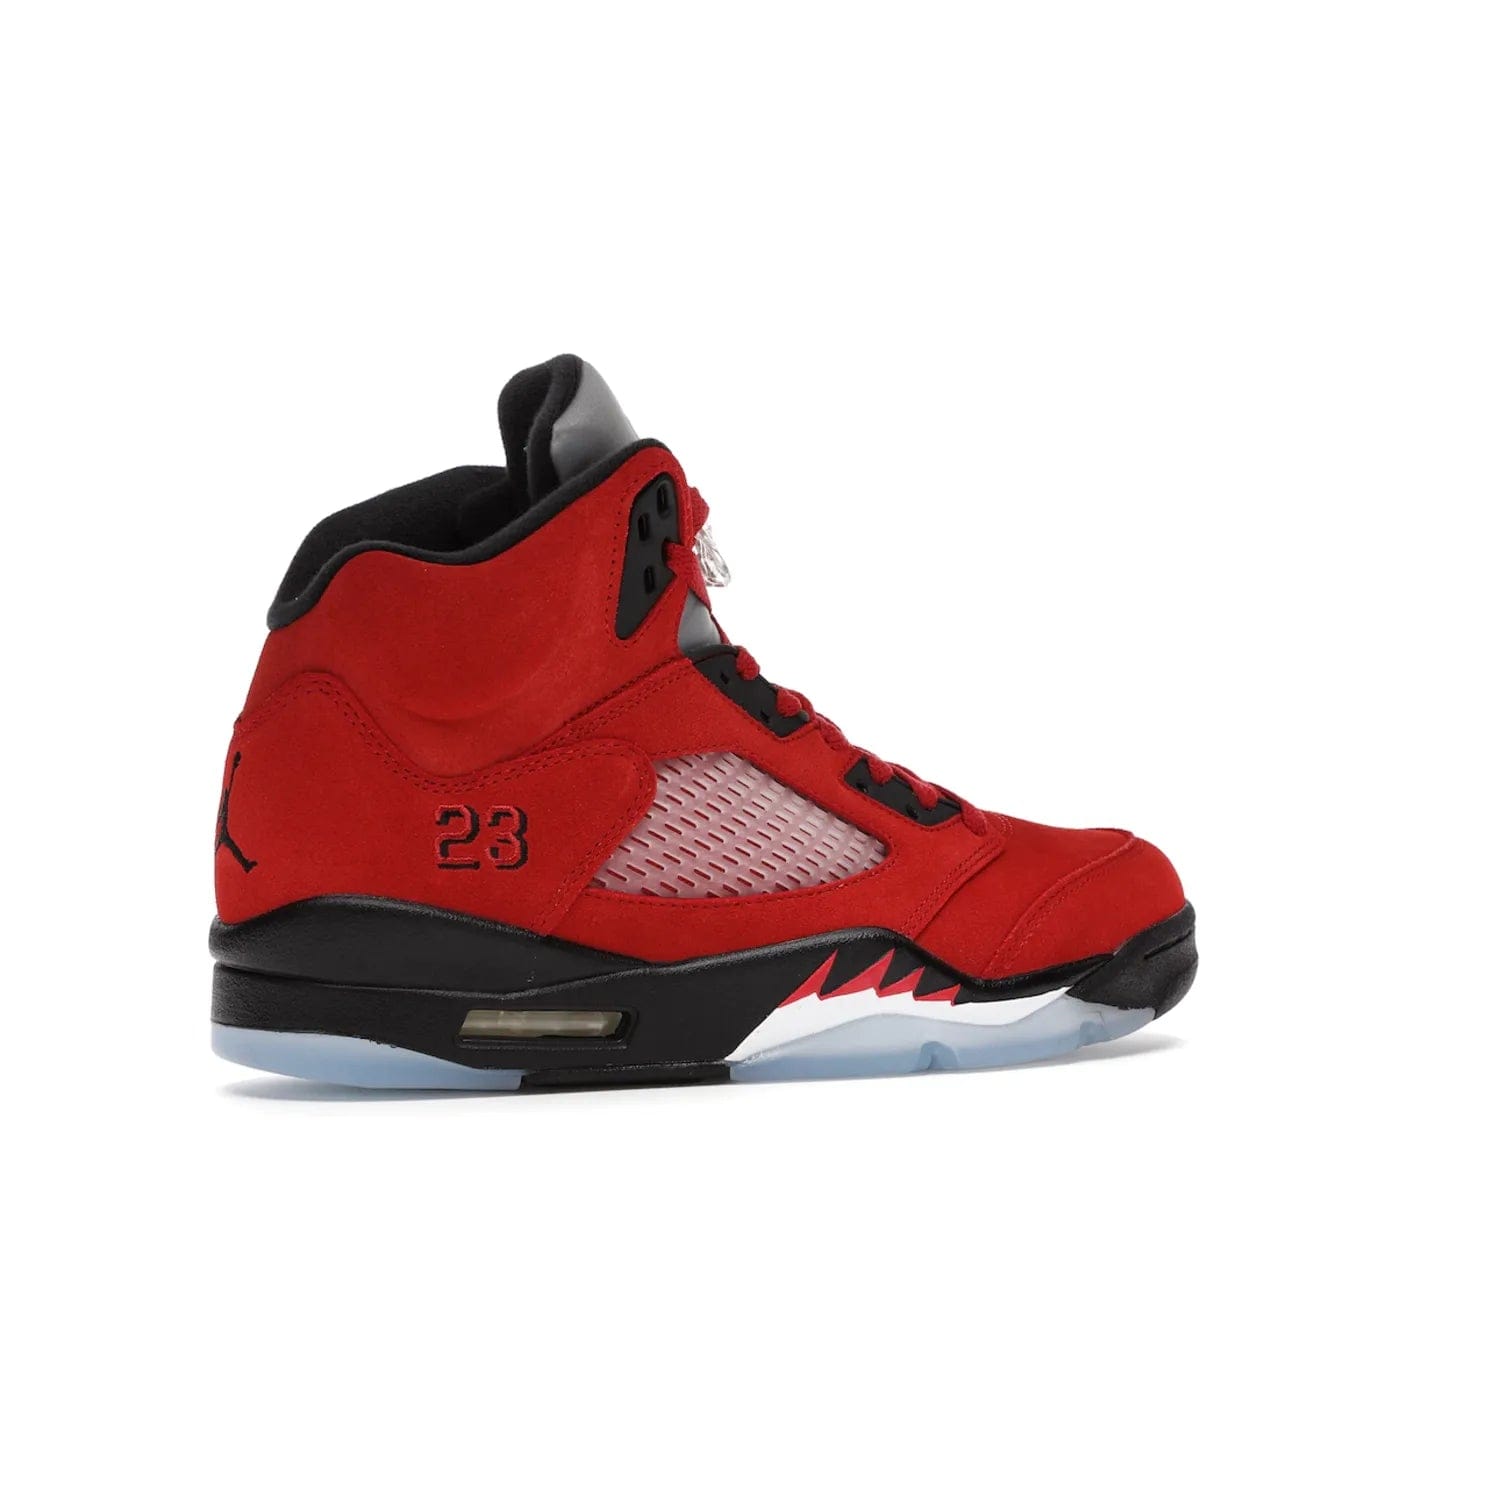 Jordan 5 Retro Raging Bull Red (2021) - Image 34 - Only at www.BallersClubKickz.com - Get ready for the 2021 stand-alone release of the Air Jordan 5 Raging Bulls! This all-suede upper combines luxe details like a Jumpman logo, red & black "23" embroidery and shark tooth detailing, atop a black midsole. Don't miss out - release date in April 2021 for $190.